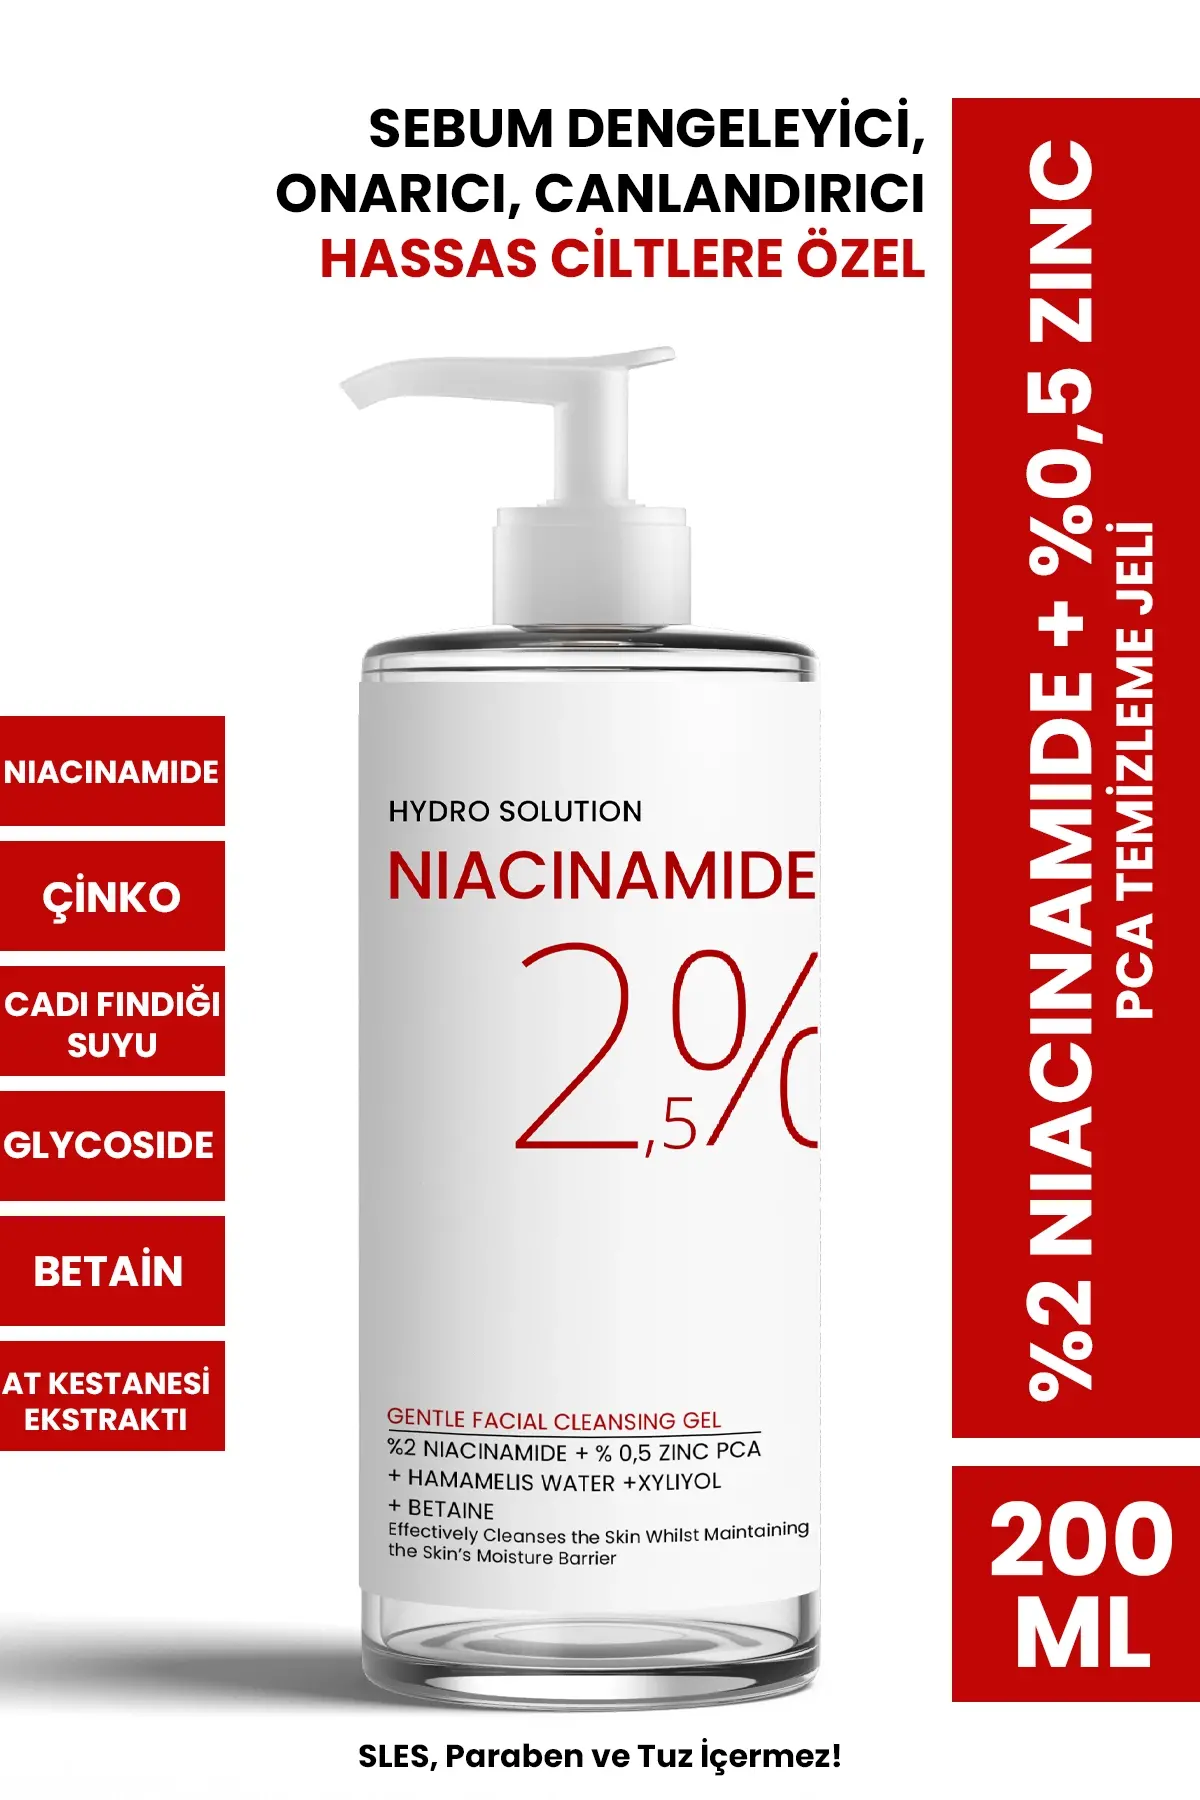 HYDRO SOLUTION Sensitive Niacinamide Face Cleansing Gel 200 ML - 1